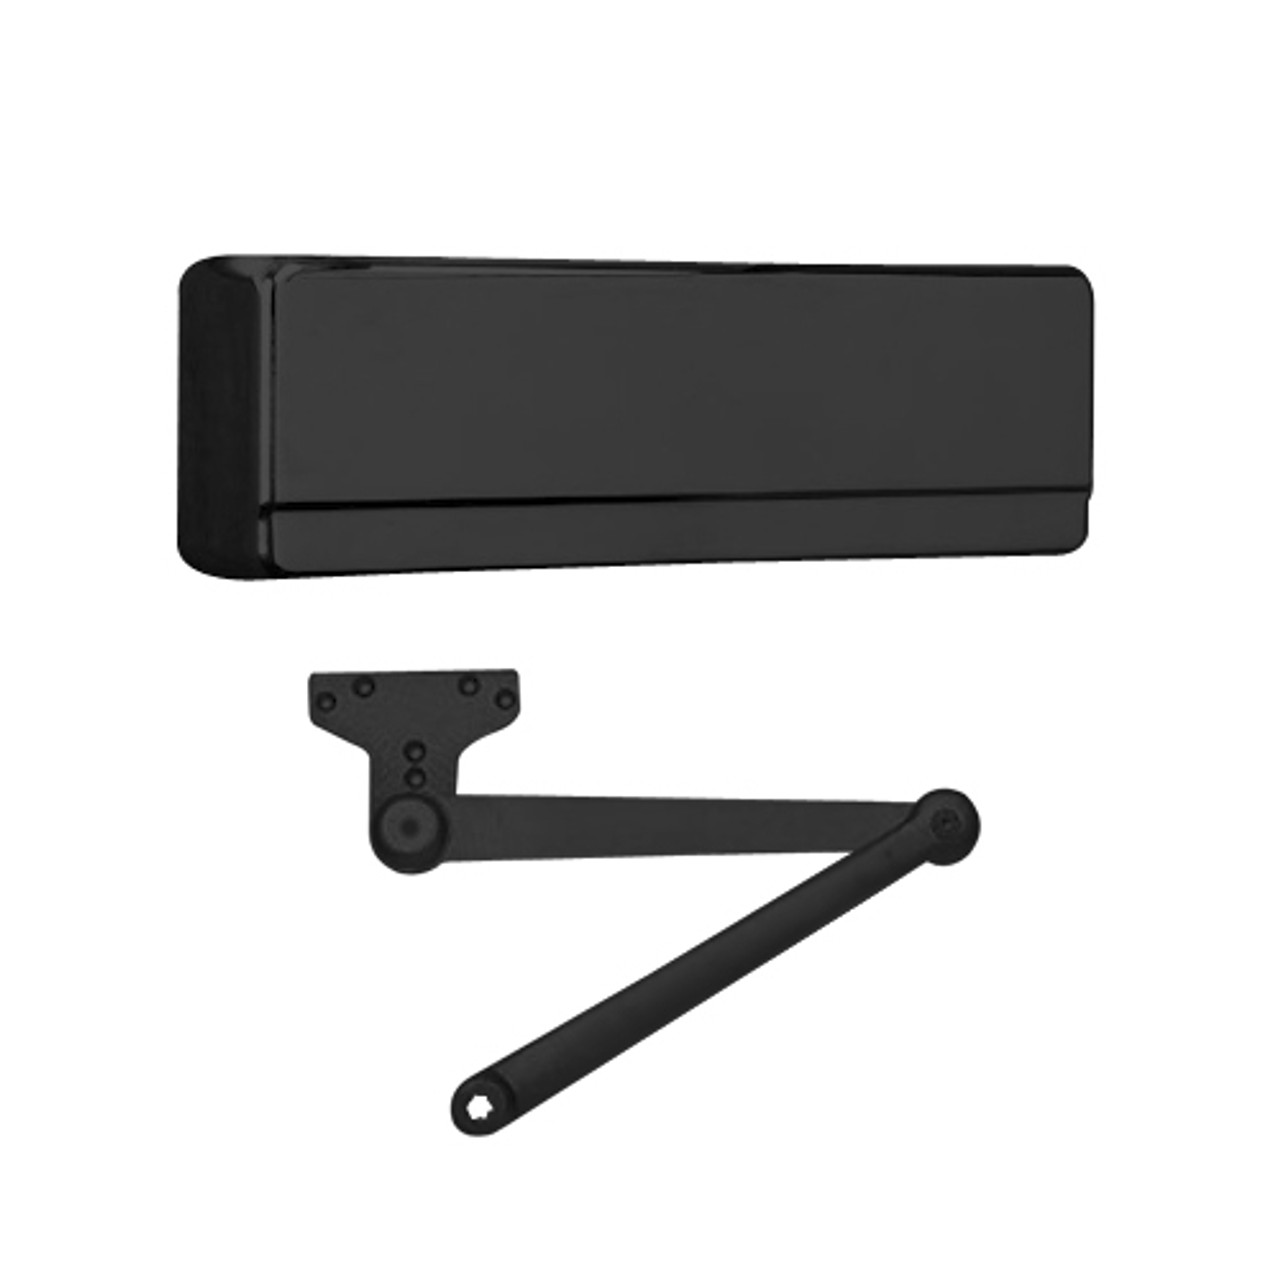 281-P10-ED Sargent 281 Series Powerglide Cast Iron Door Closer with Heavy Duty Parallel Arm in Black Powder Coat